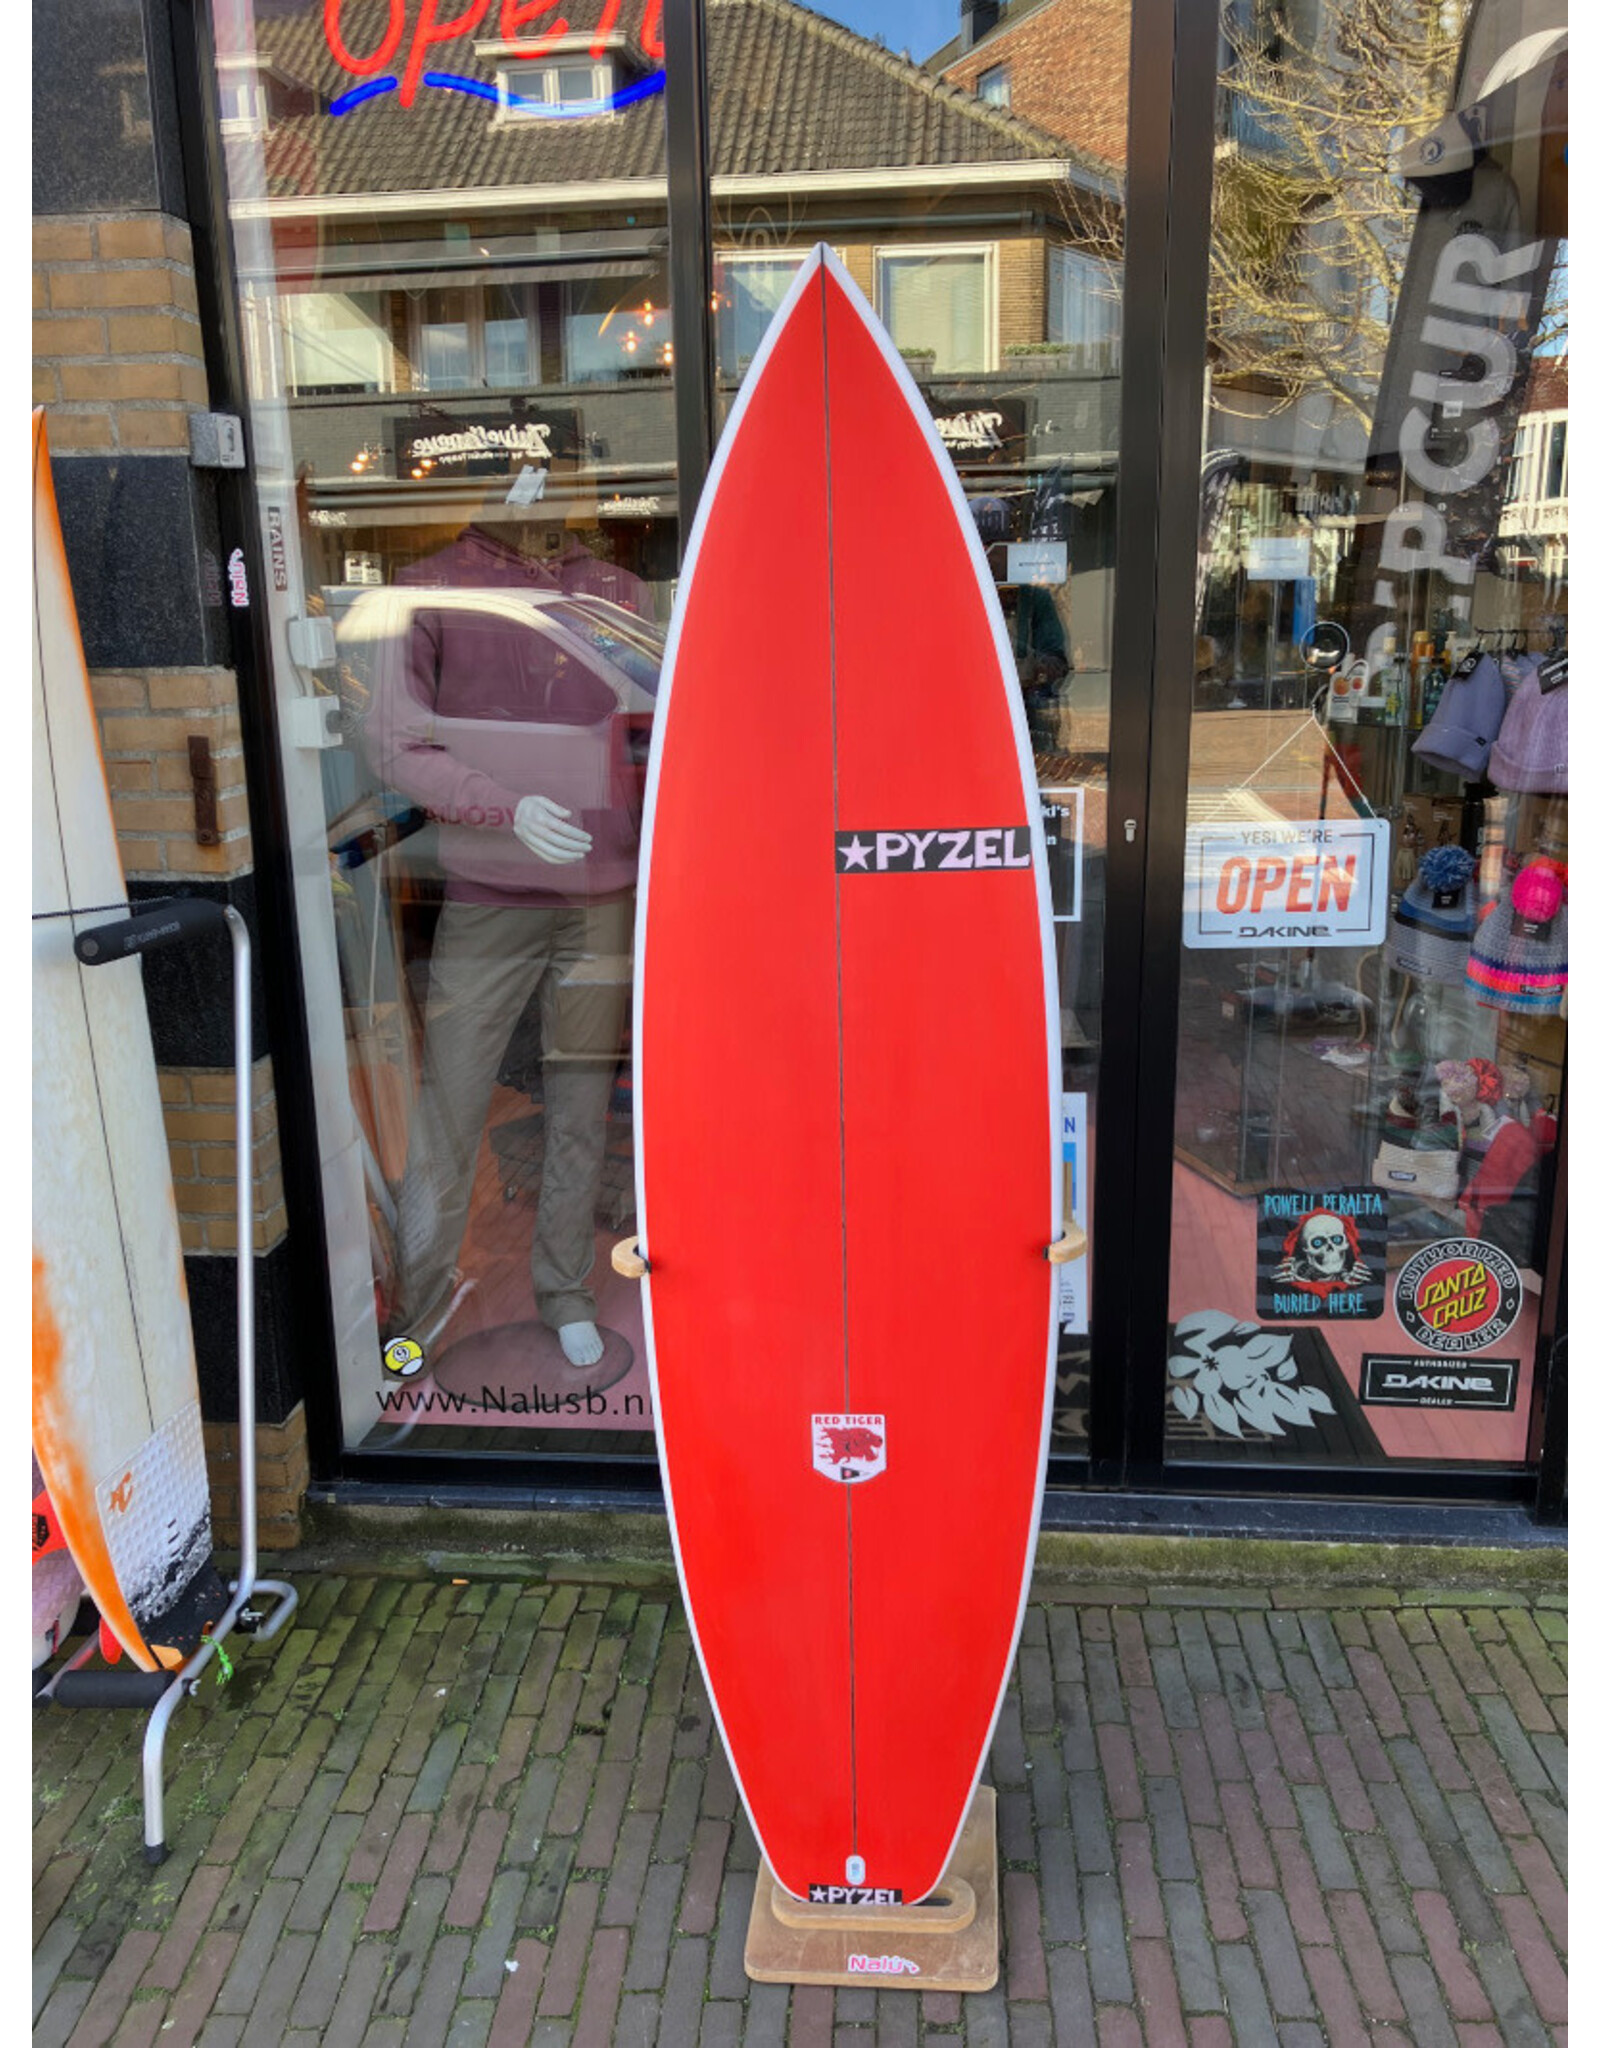 Pyzel Surfboards Pyzel 6'4" Red Tiger Futures